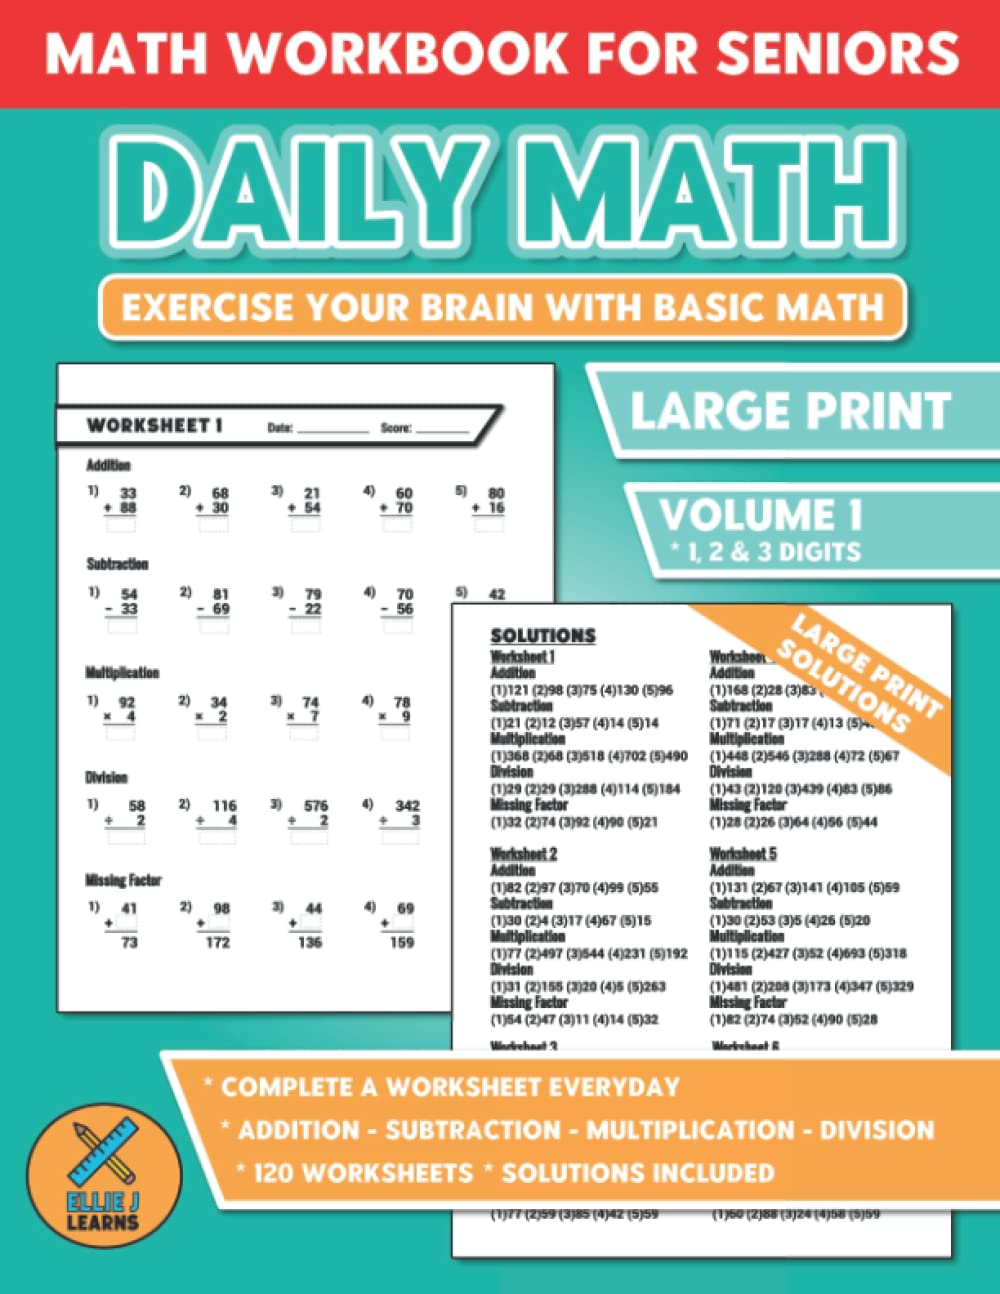 Daily Math - Math Workbook For Seniors: Exercise Your Brain With Basic Math | Mathematics Learning Activity Worksheets For Senior Citizens | Volume 1